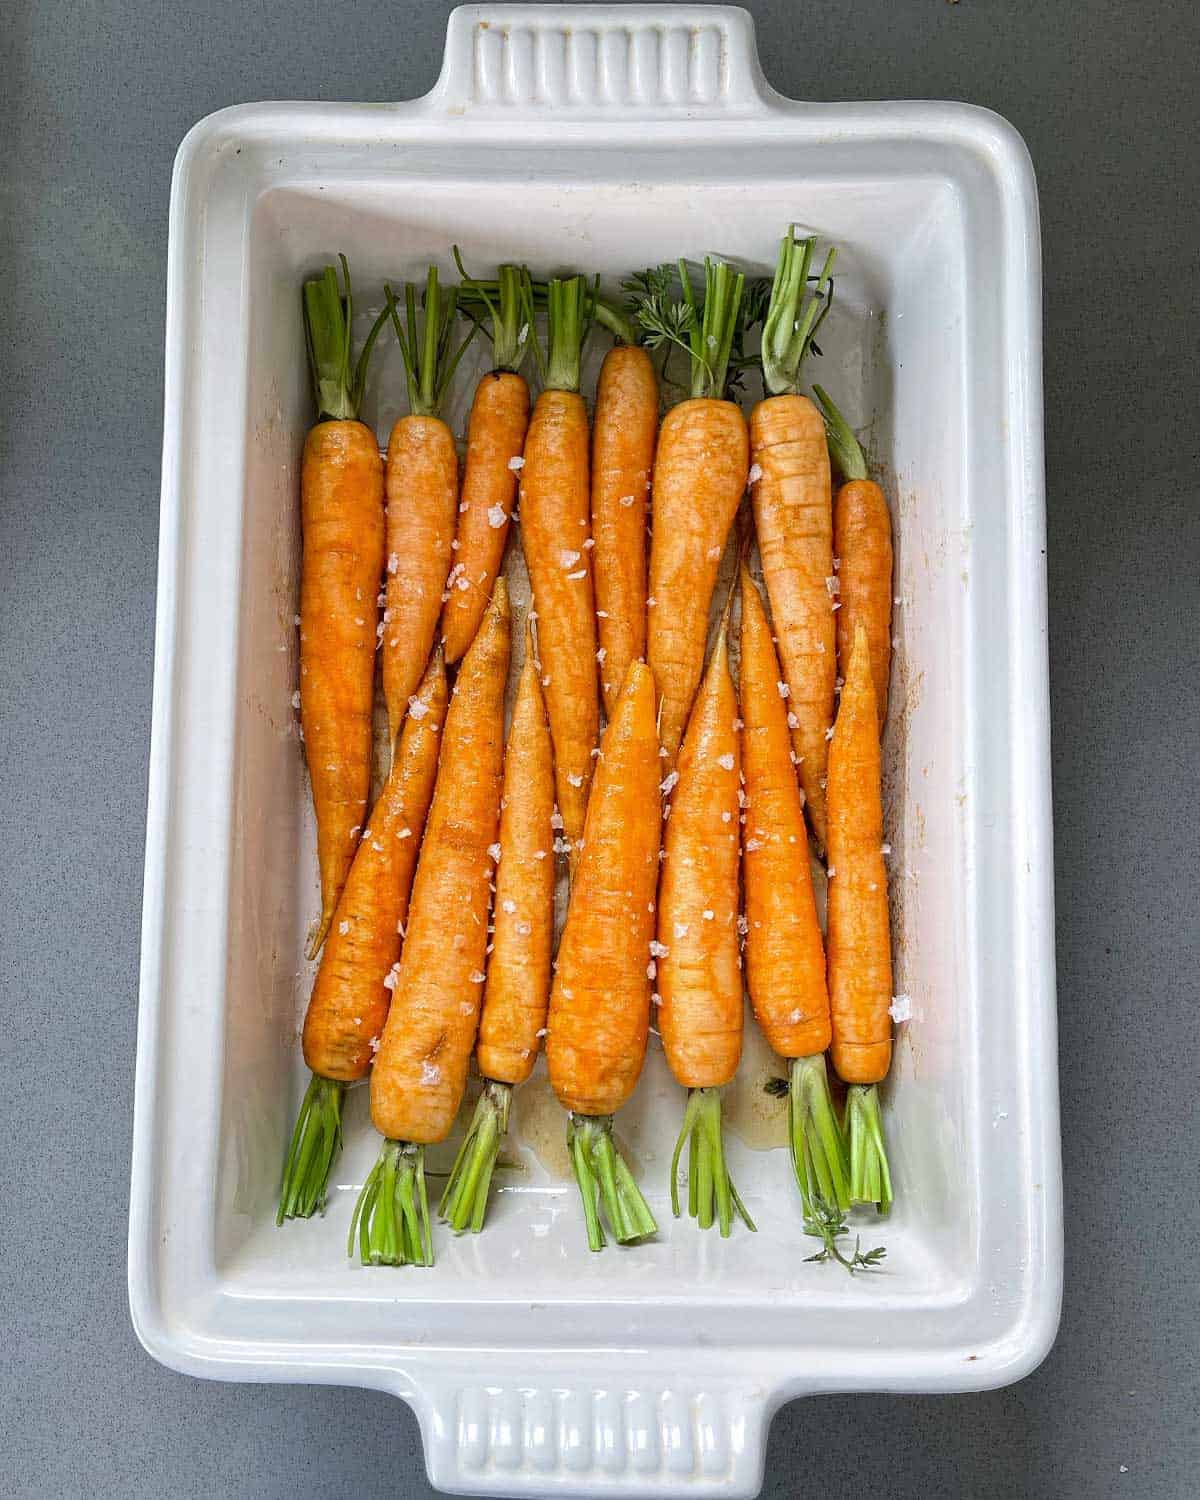 Uncooked carrots in a white baking dish.